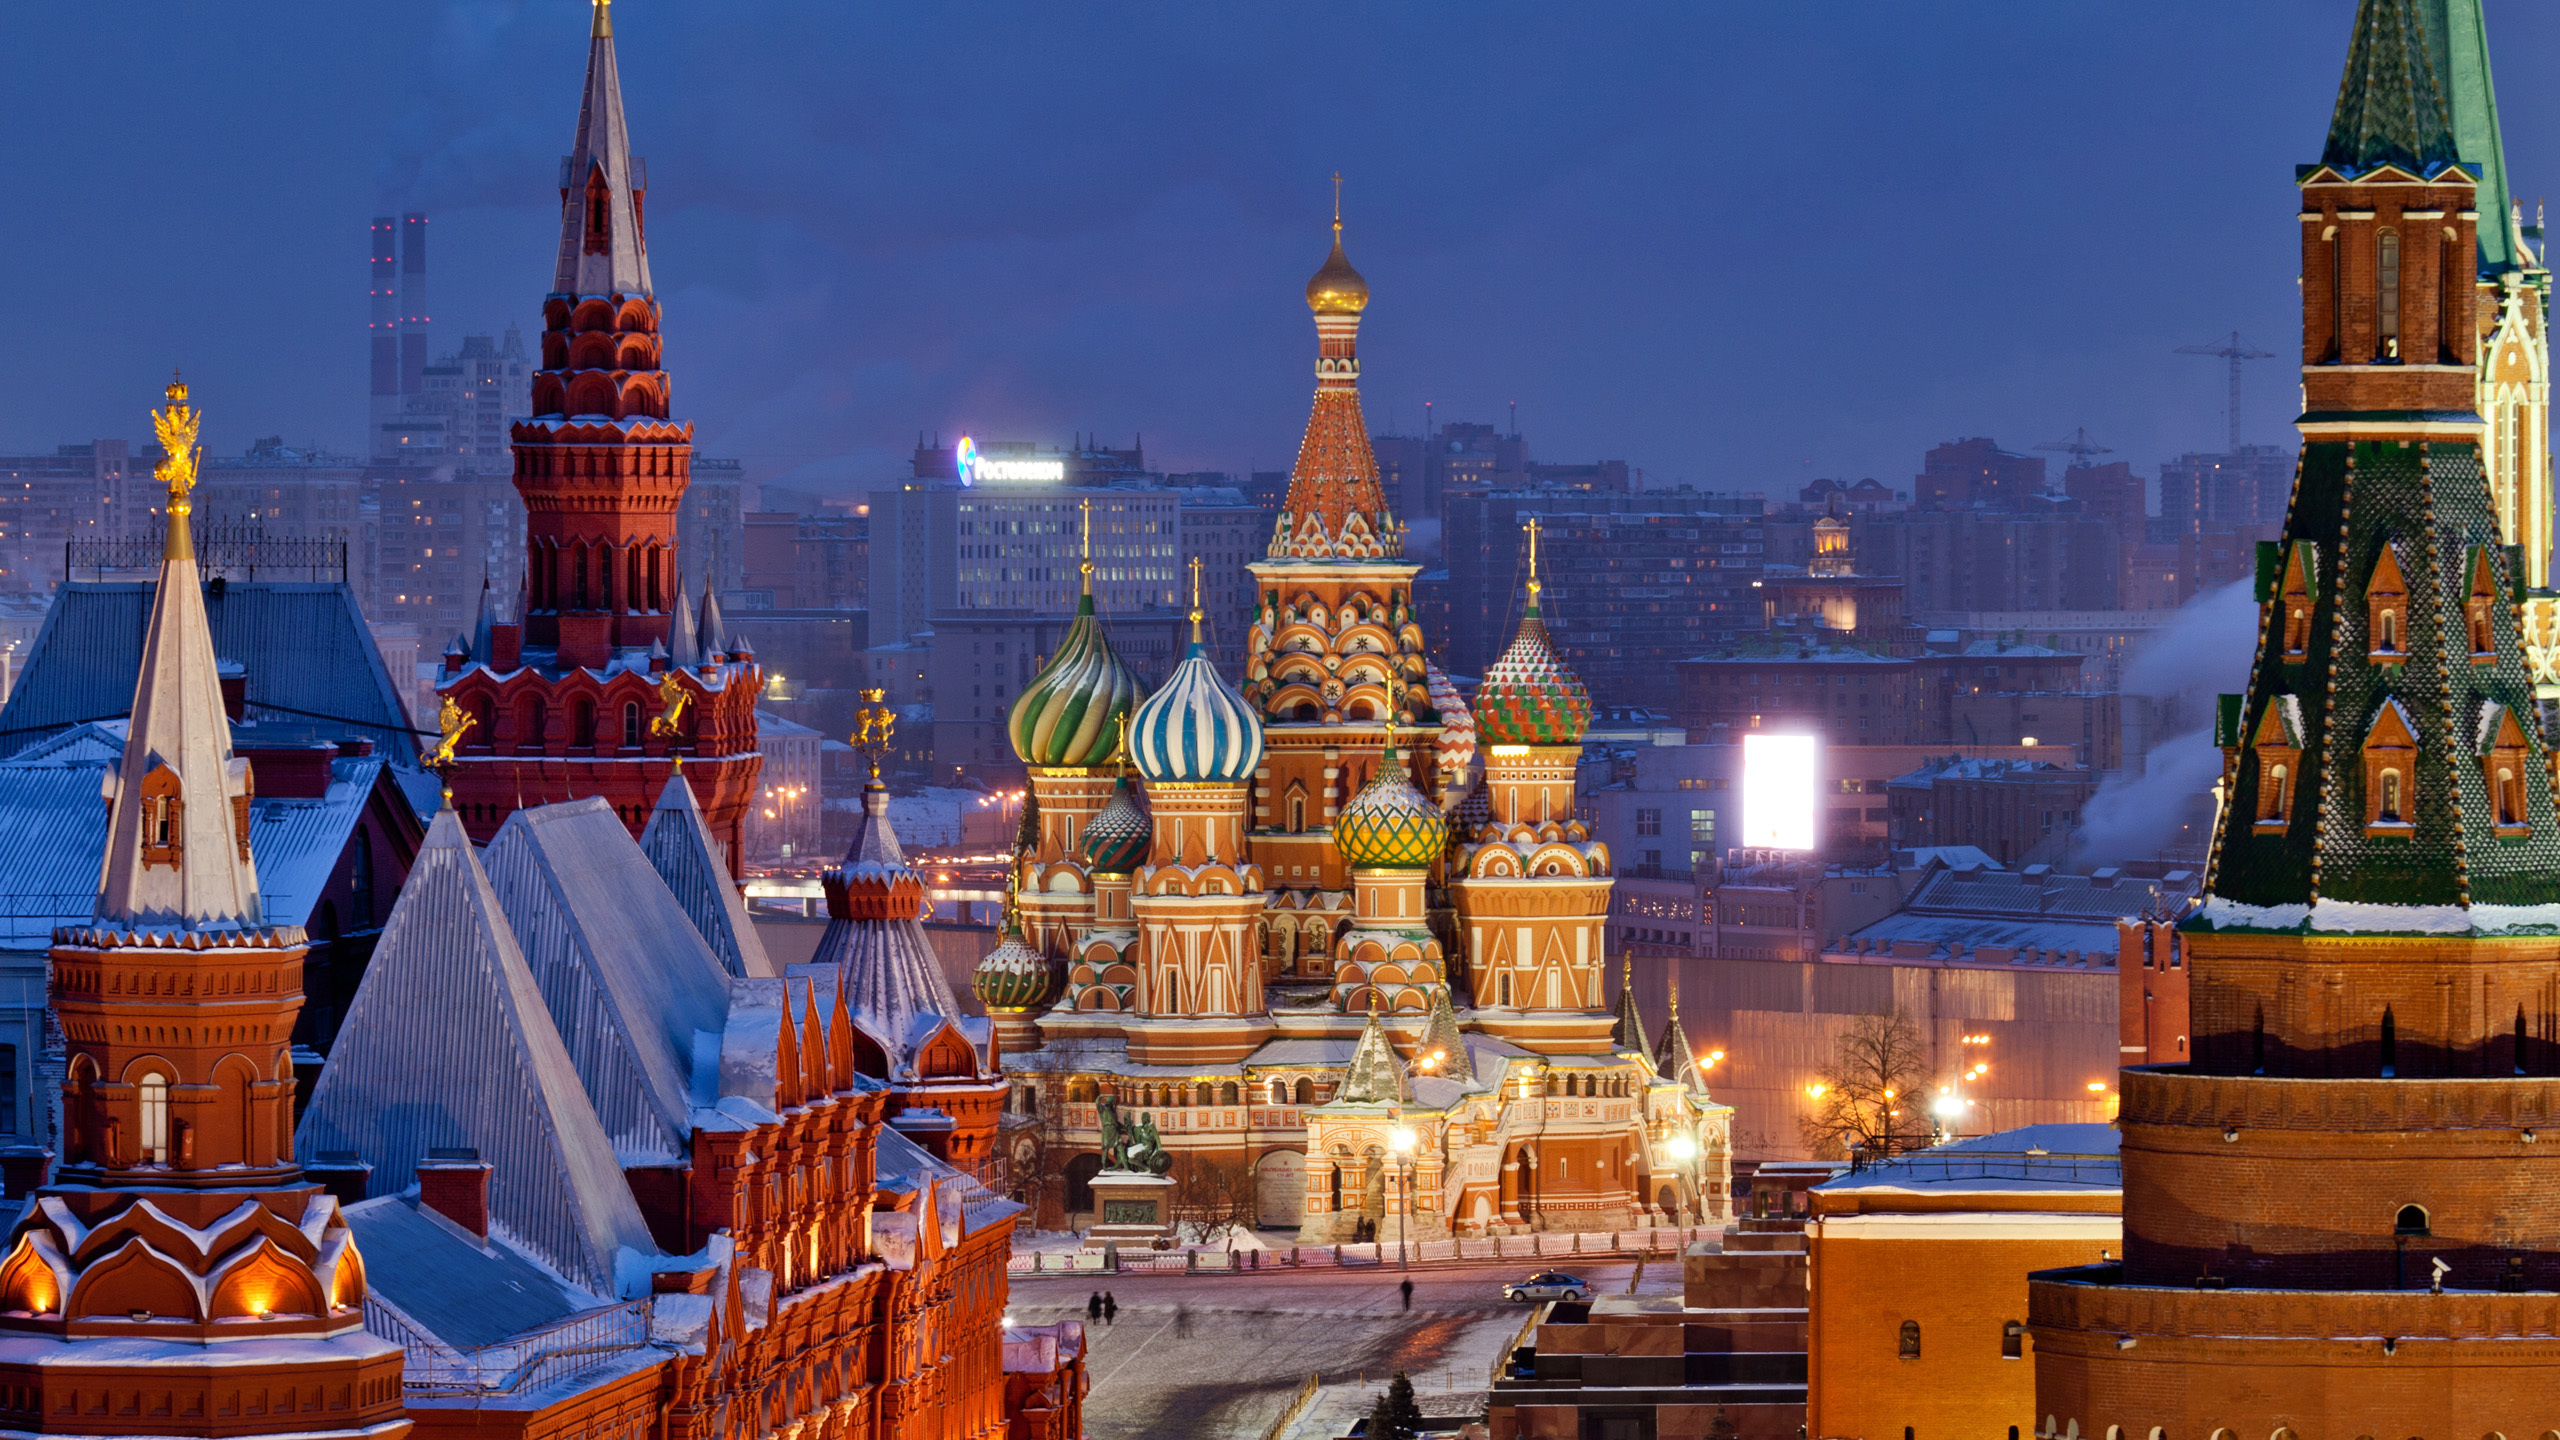 Moscow in winter time wallpapers and images - wallpapers, pictures, photos